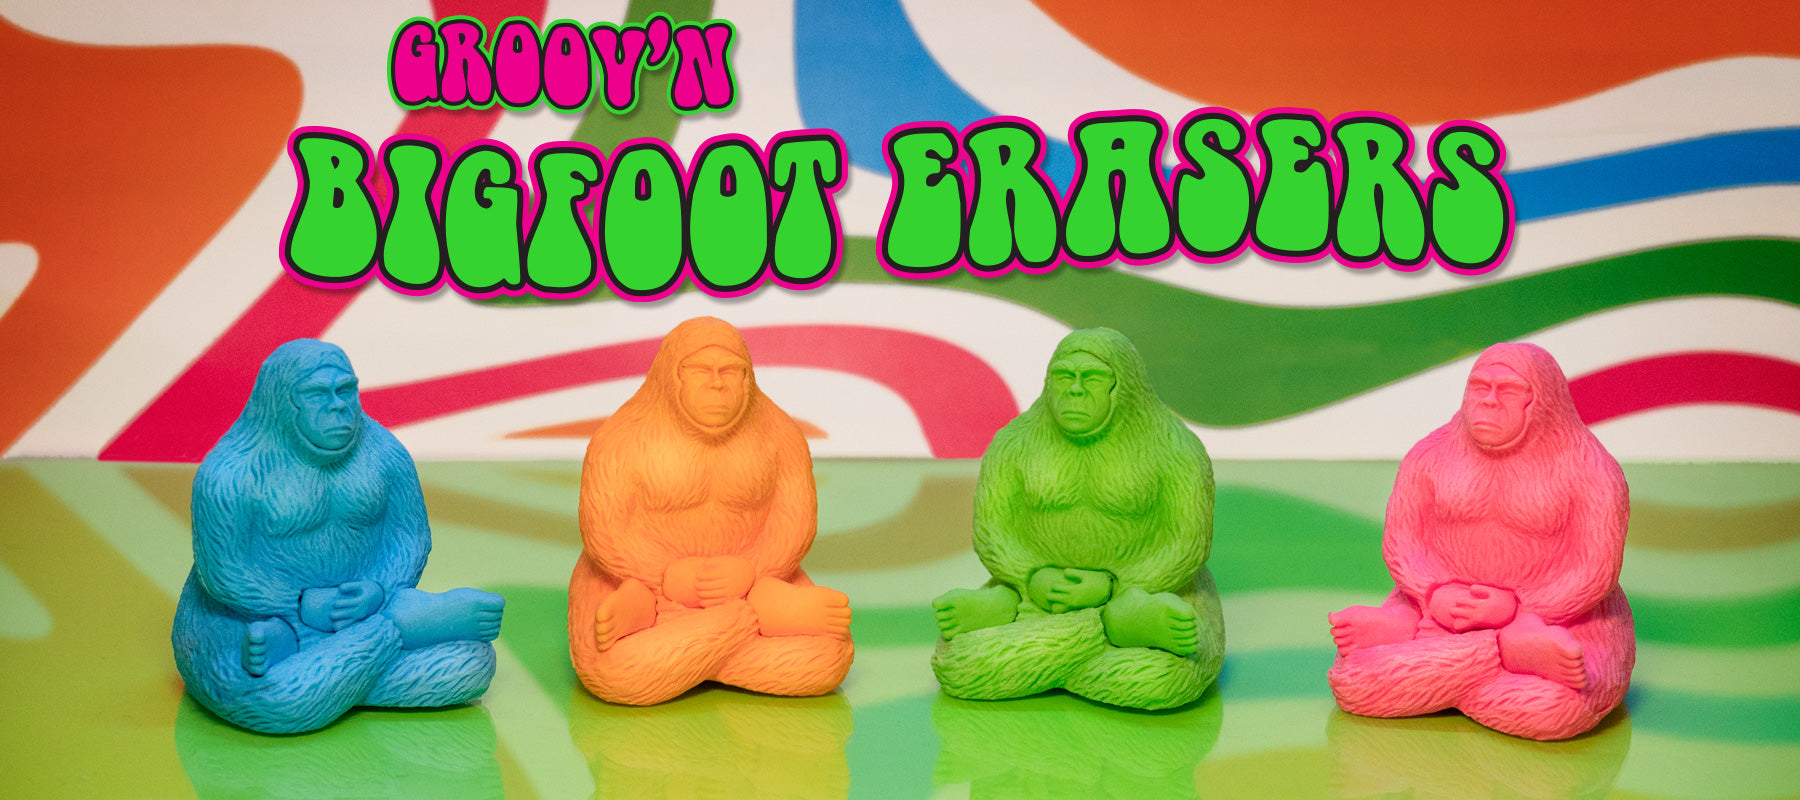 Four colorful Bigfoot Erasers.